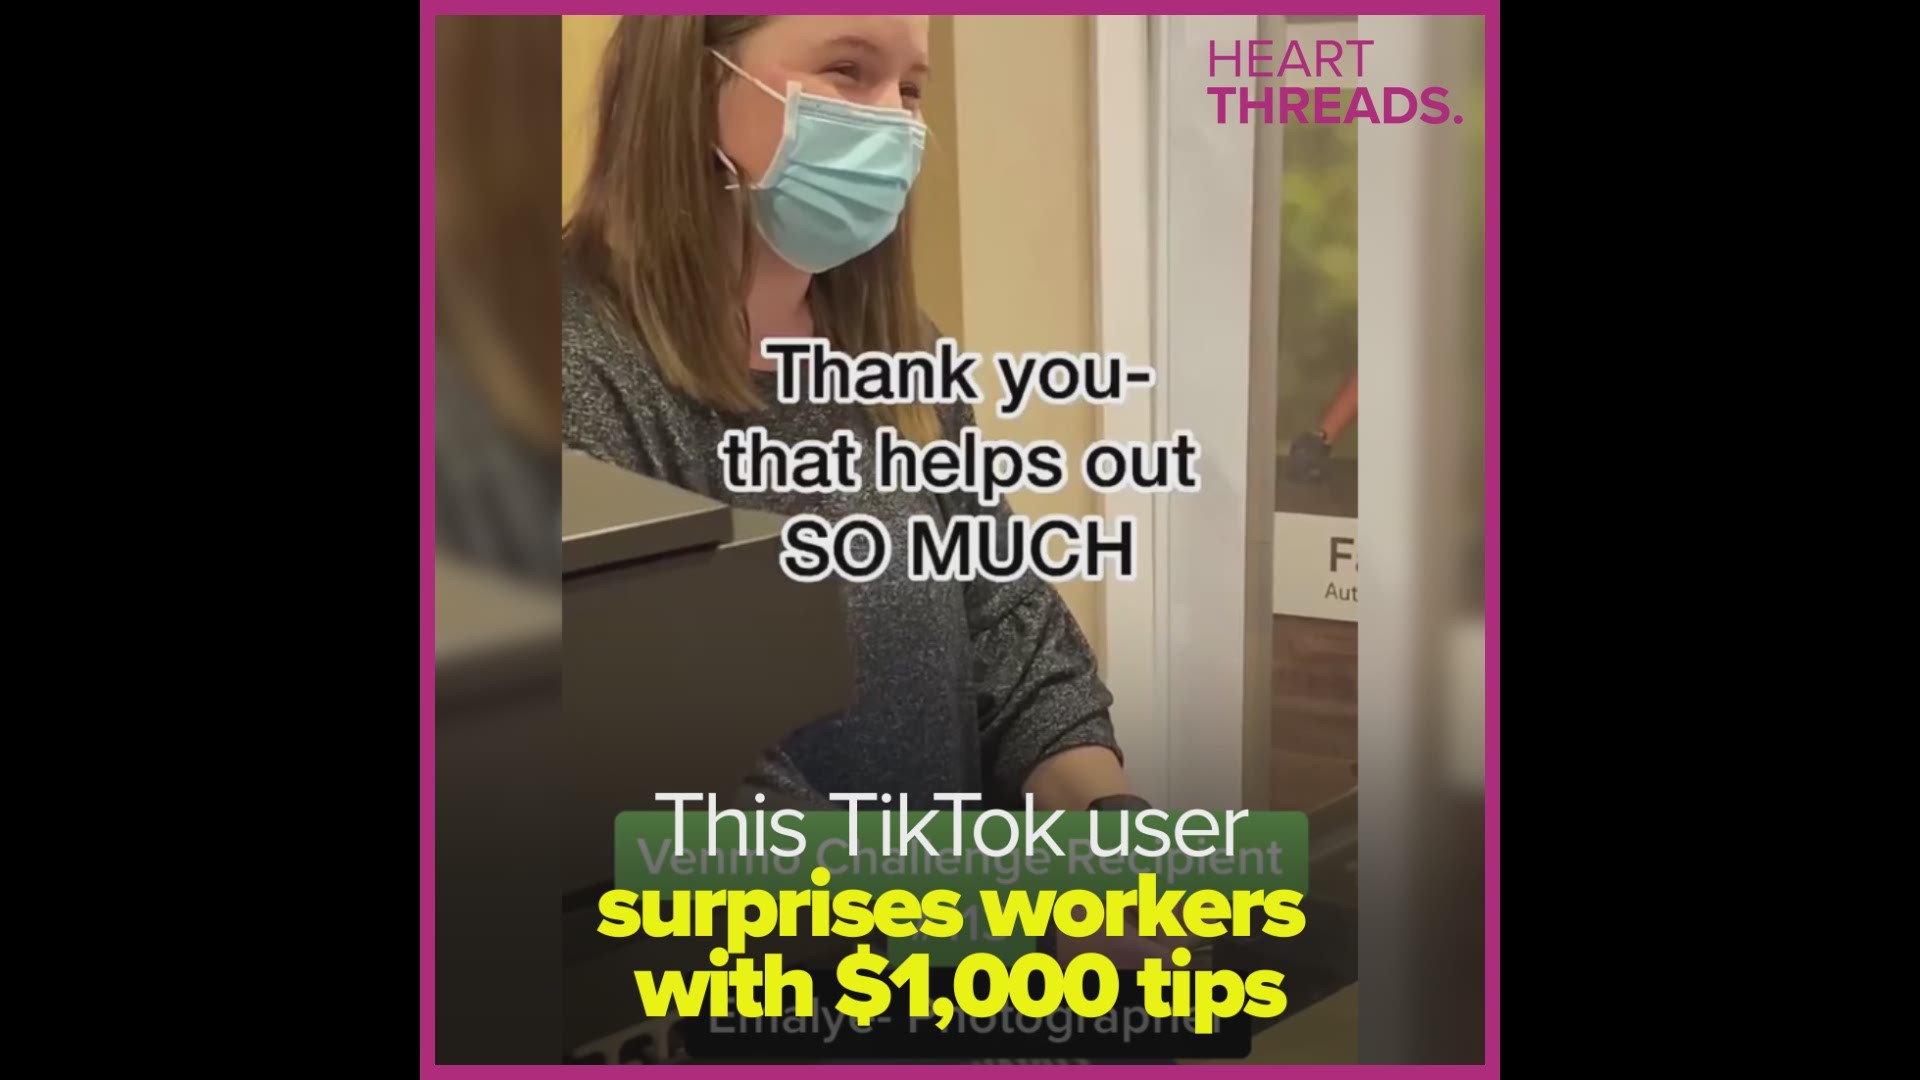 Lexy Burke crowdsources thousands of dollars in tips from her TikTok followers to surprise service industry workers with generous tips.